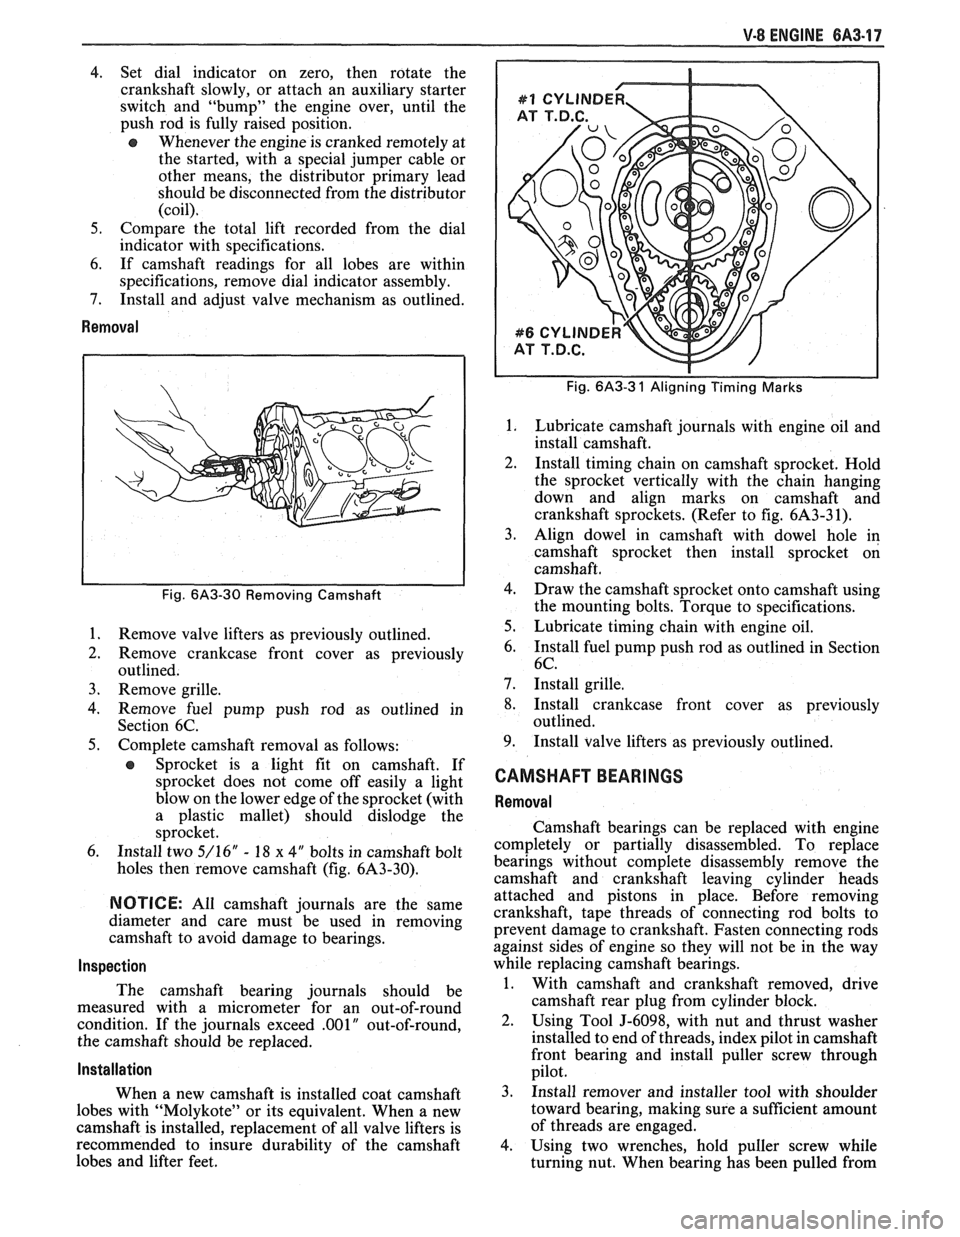 PONTIAC FIERO 1988  Service User Guide 
V-8 ENGINE 6A3.17 
4. Set  dial  indicator on zero,  then  rotate  the 
crankshaft  slowly, or attach  an  auxiliary  starter 
switch  and "bump"  the engine  over,  until the 
push  rod is fully rai